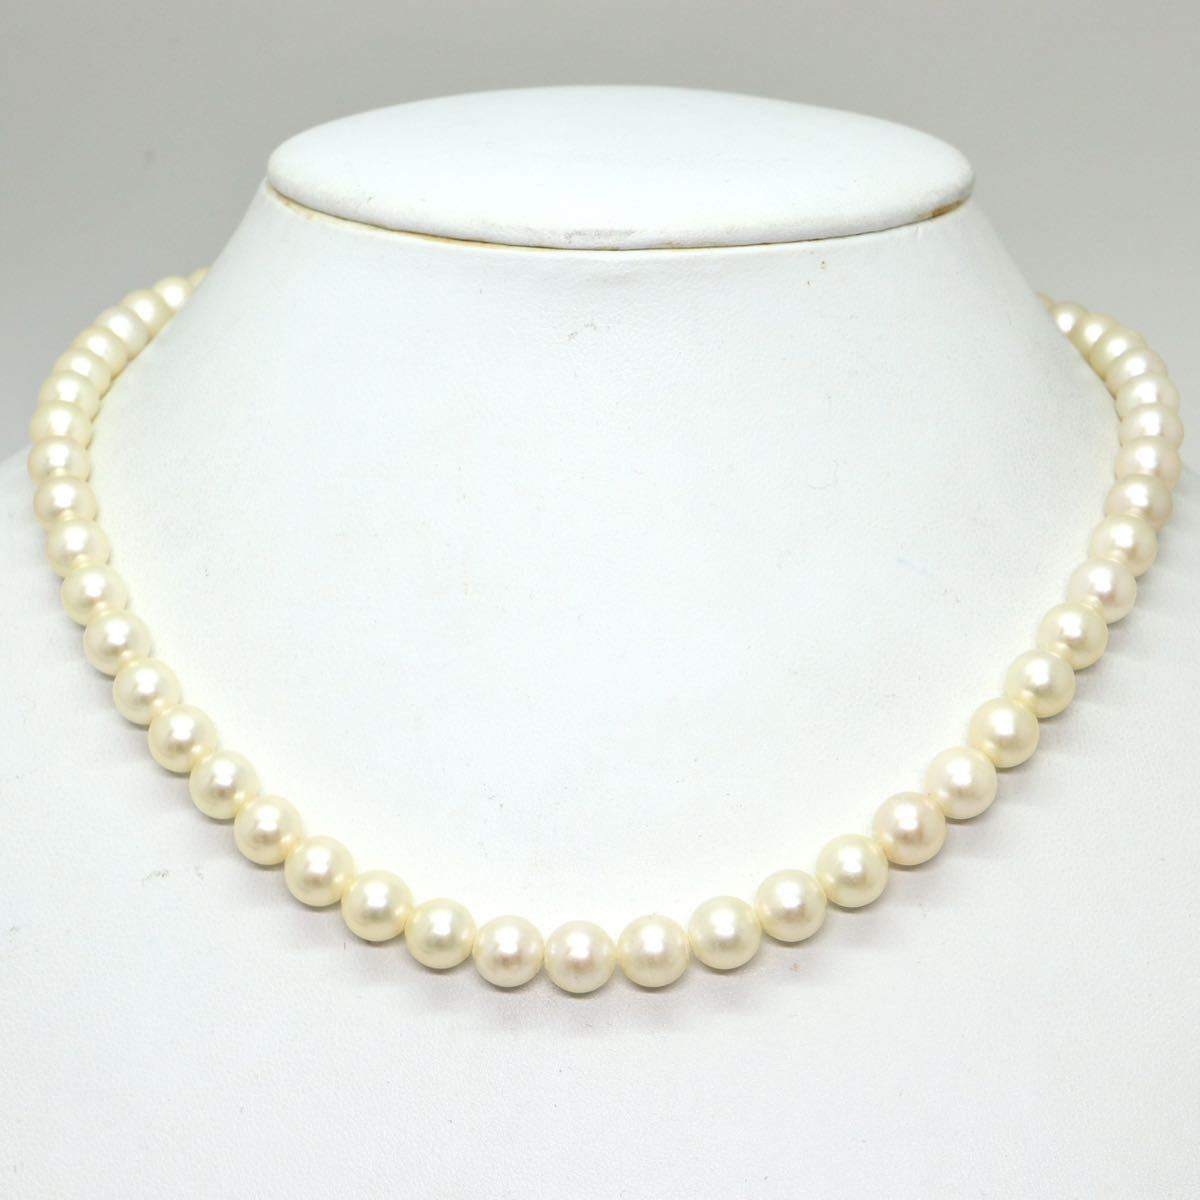 《K18アコヤ本真珠ネックレス》N 7.0-7.5mm珠 31.4g 41.5cm pearl necklace jewelry ジュエリー EA0/EB0_画像2